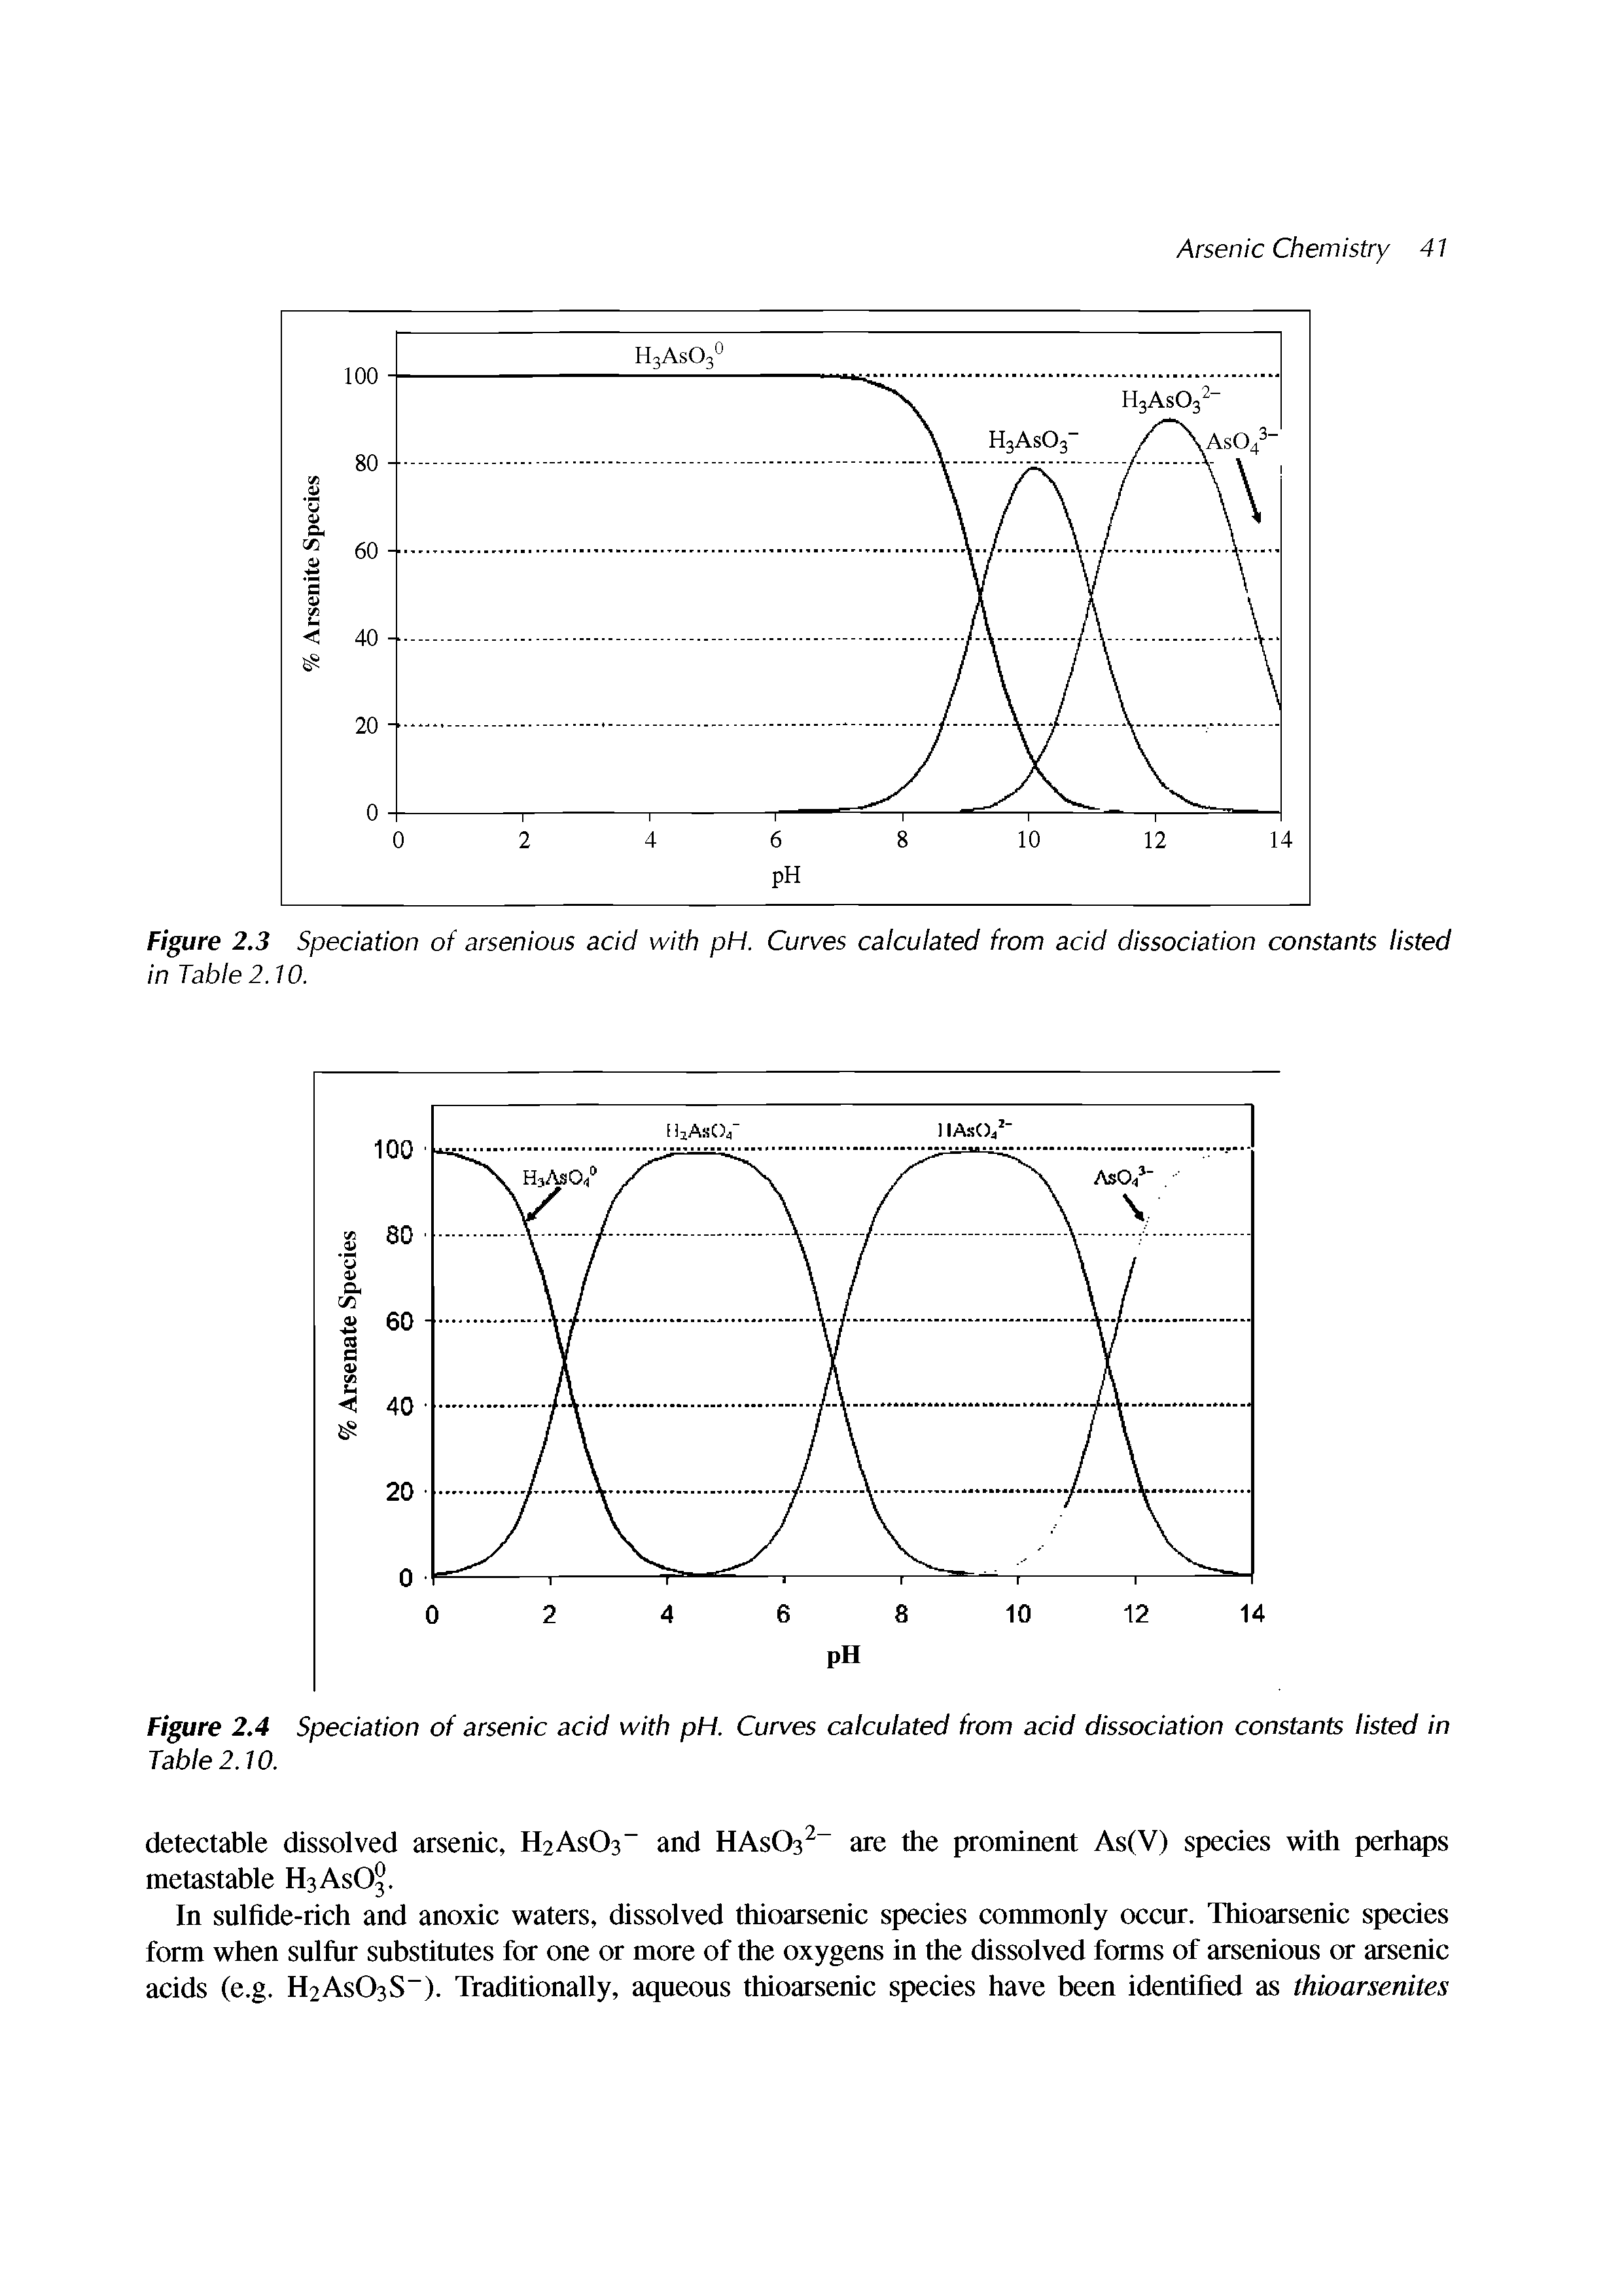 Figure 2.4 Speciation of arsenic acid with pH. Curves calculated from acid dissociation constants listed in Table 2.10.